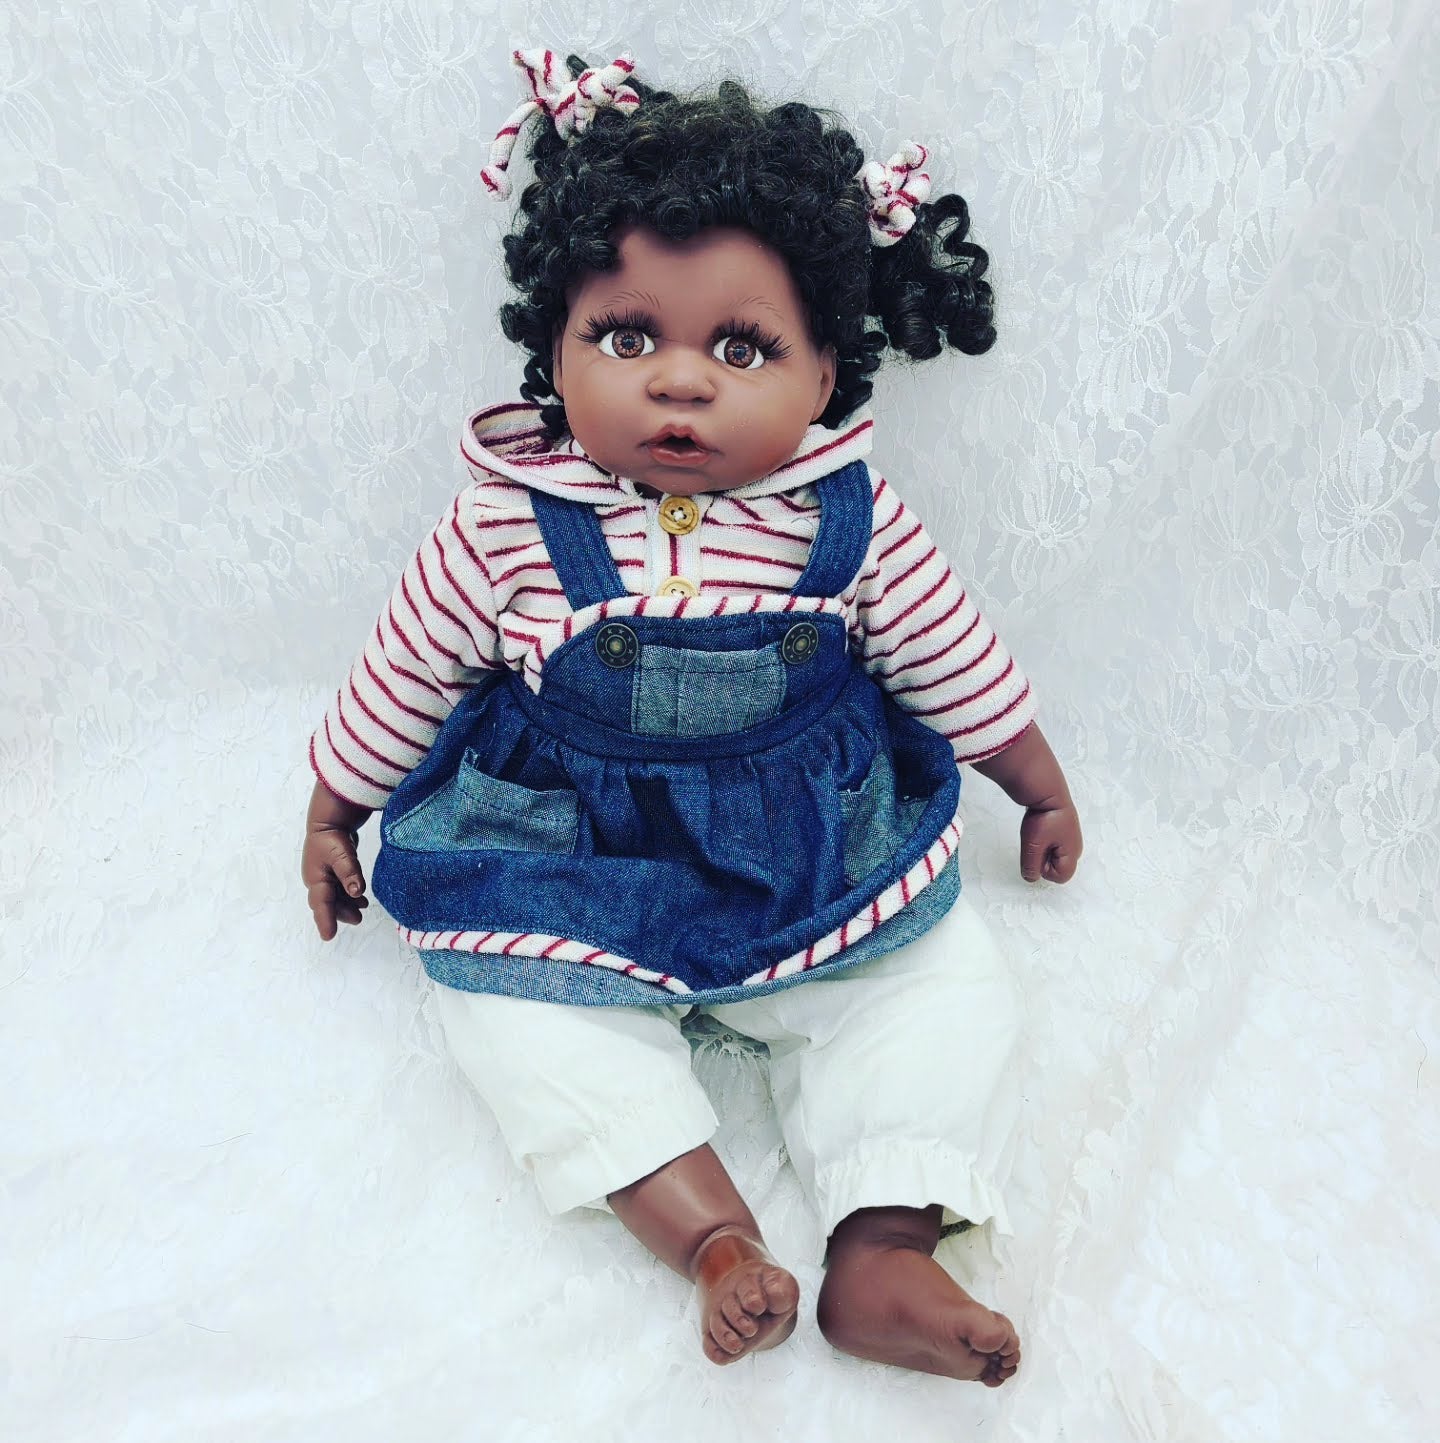 Reserved Tara 2/3 SALE! Danya Haunted Doll ~ 23" African American Vinyl Toddler Vessel ~ Paranormal ~ Sweet Girl ~ Thinks She's Bigger Than She Is ~ Wannabe Big Sister